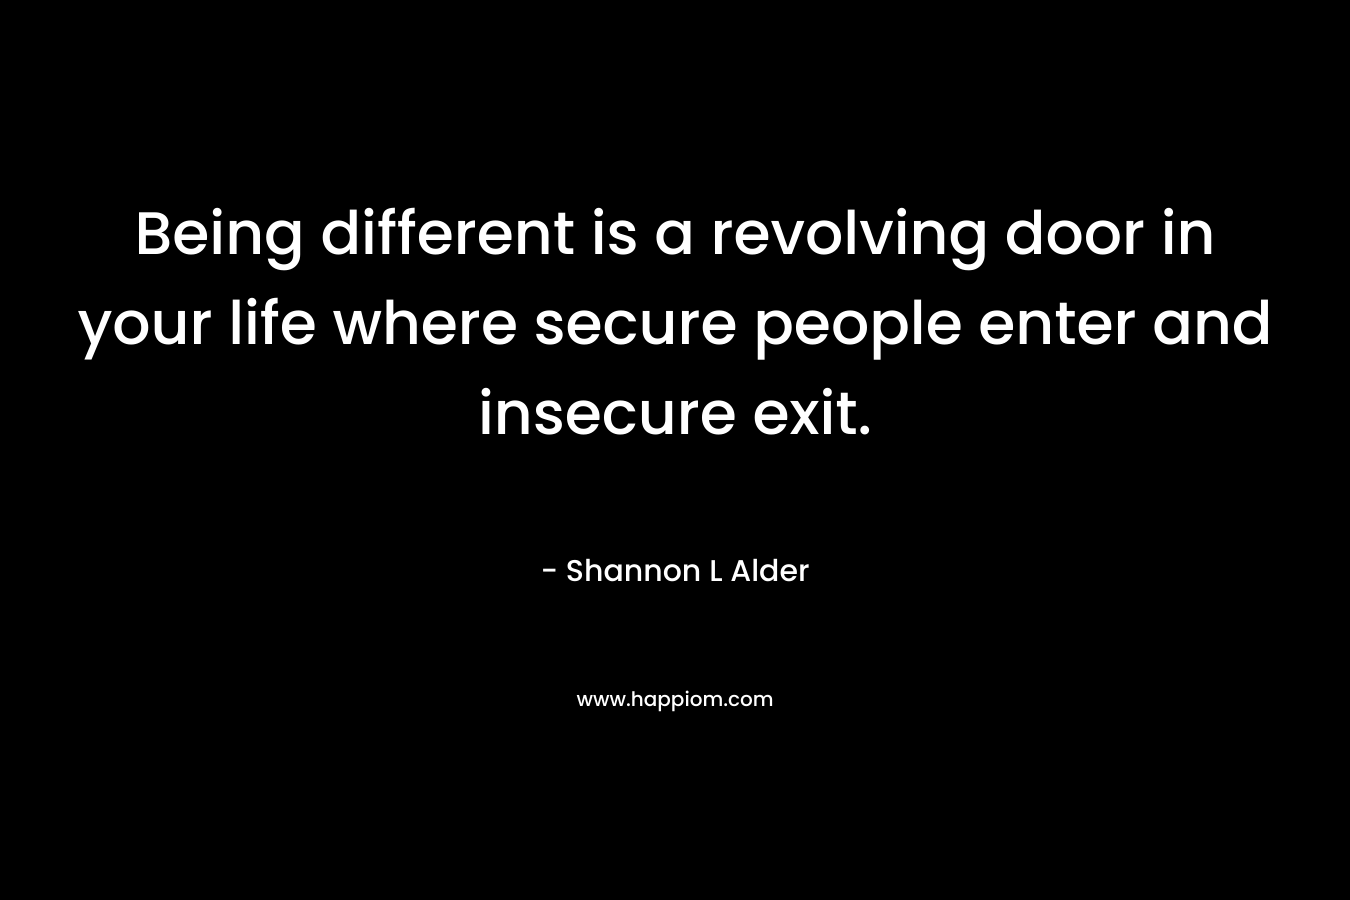 Being different is a revolving door in your life where secure people enter and insecure exit.